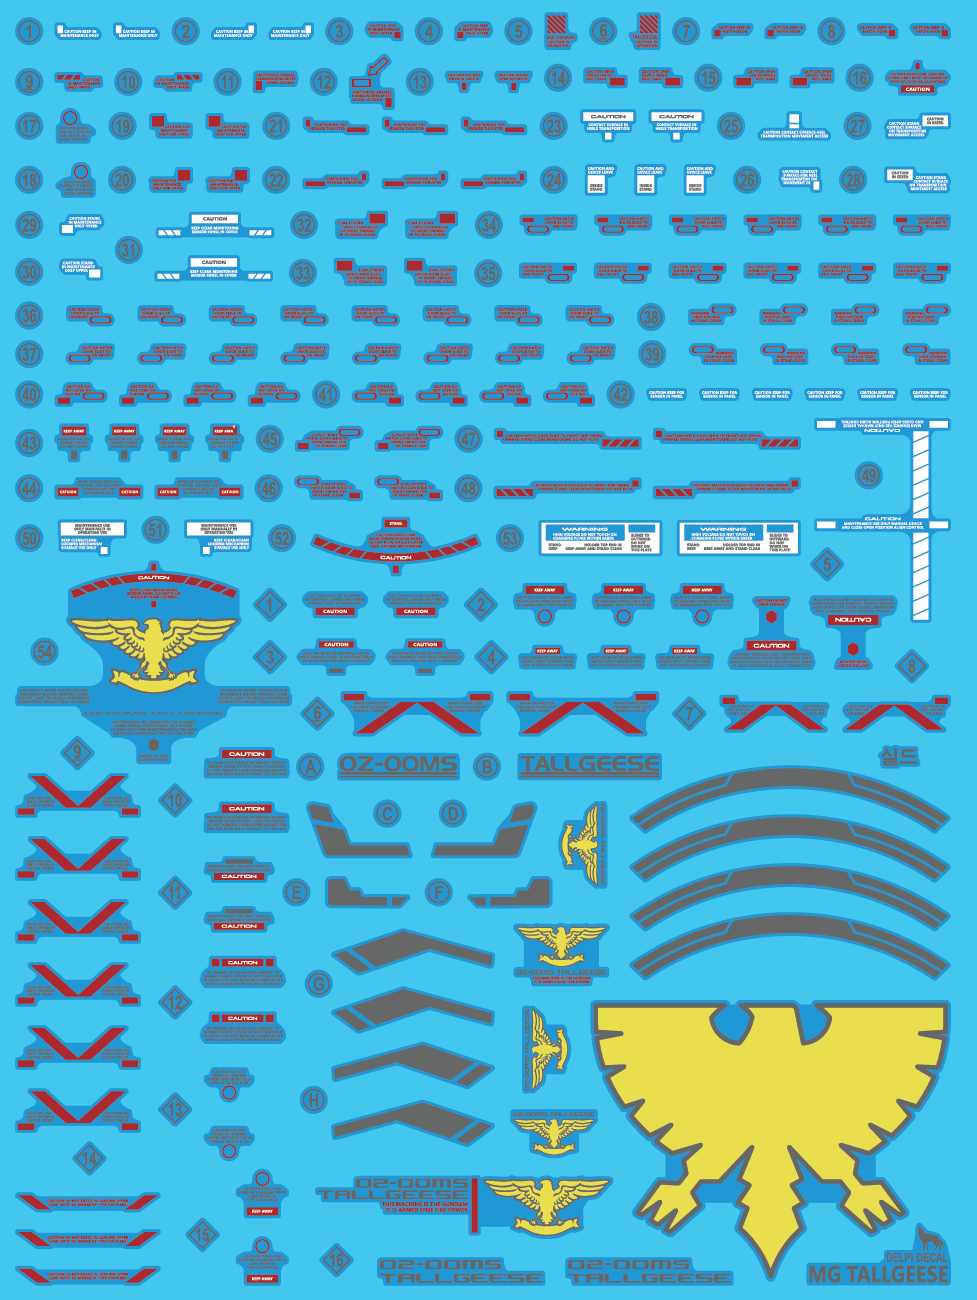 Delpi - MG TALLGEESE HOLO (Polygonal patterns) WATER DECAL